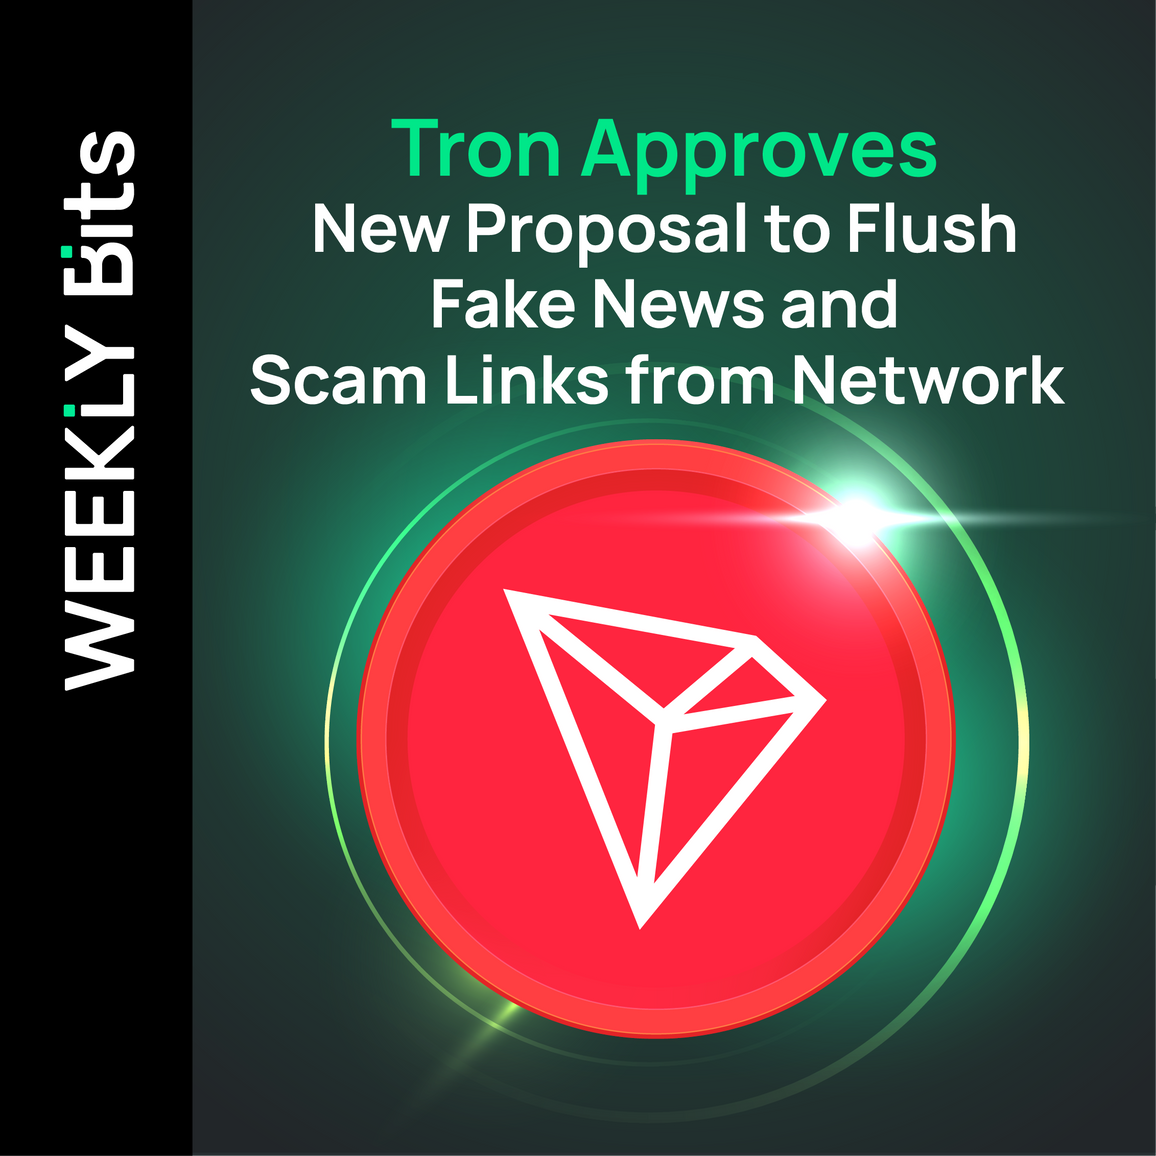 Tron Approves New Proposal to Flush Fake News and Scam Links from Network